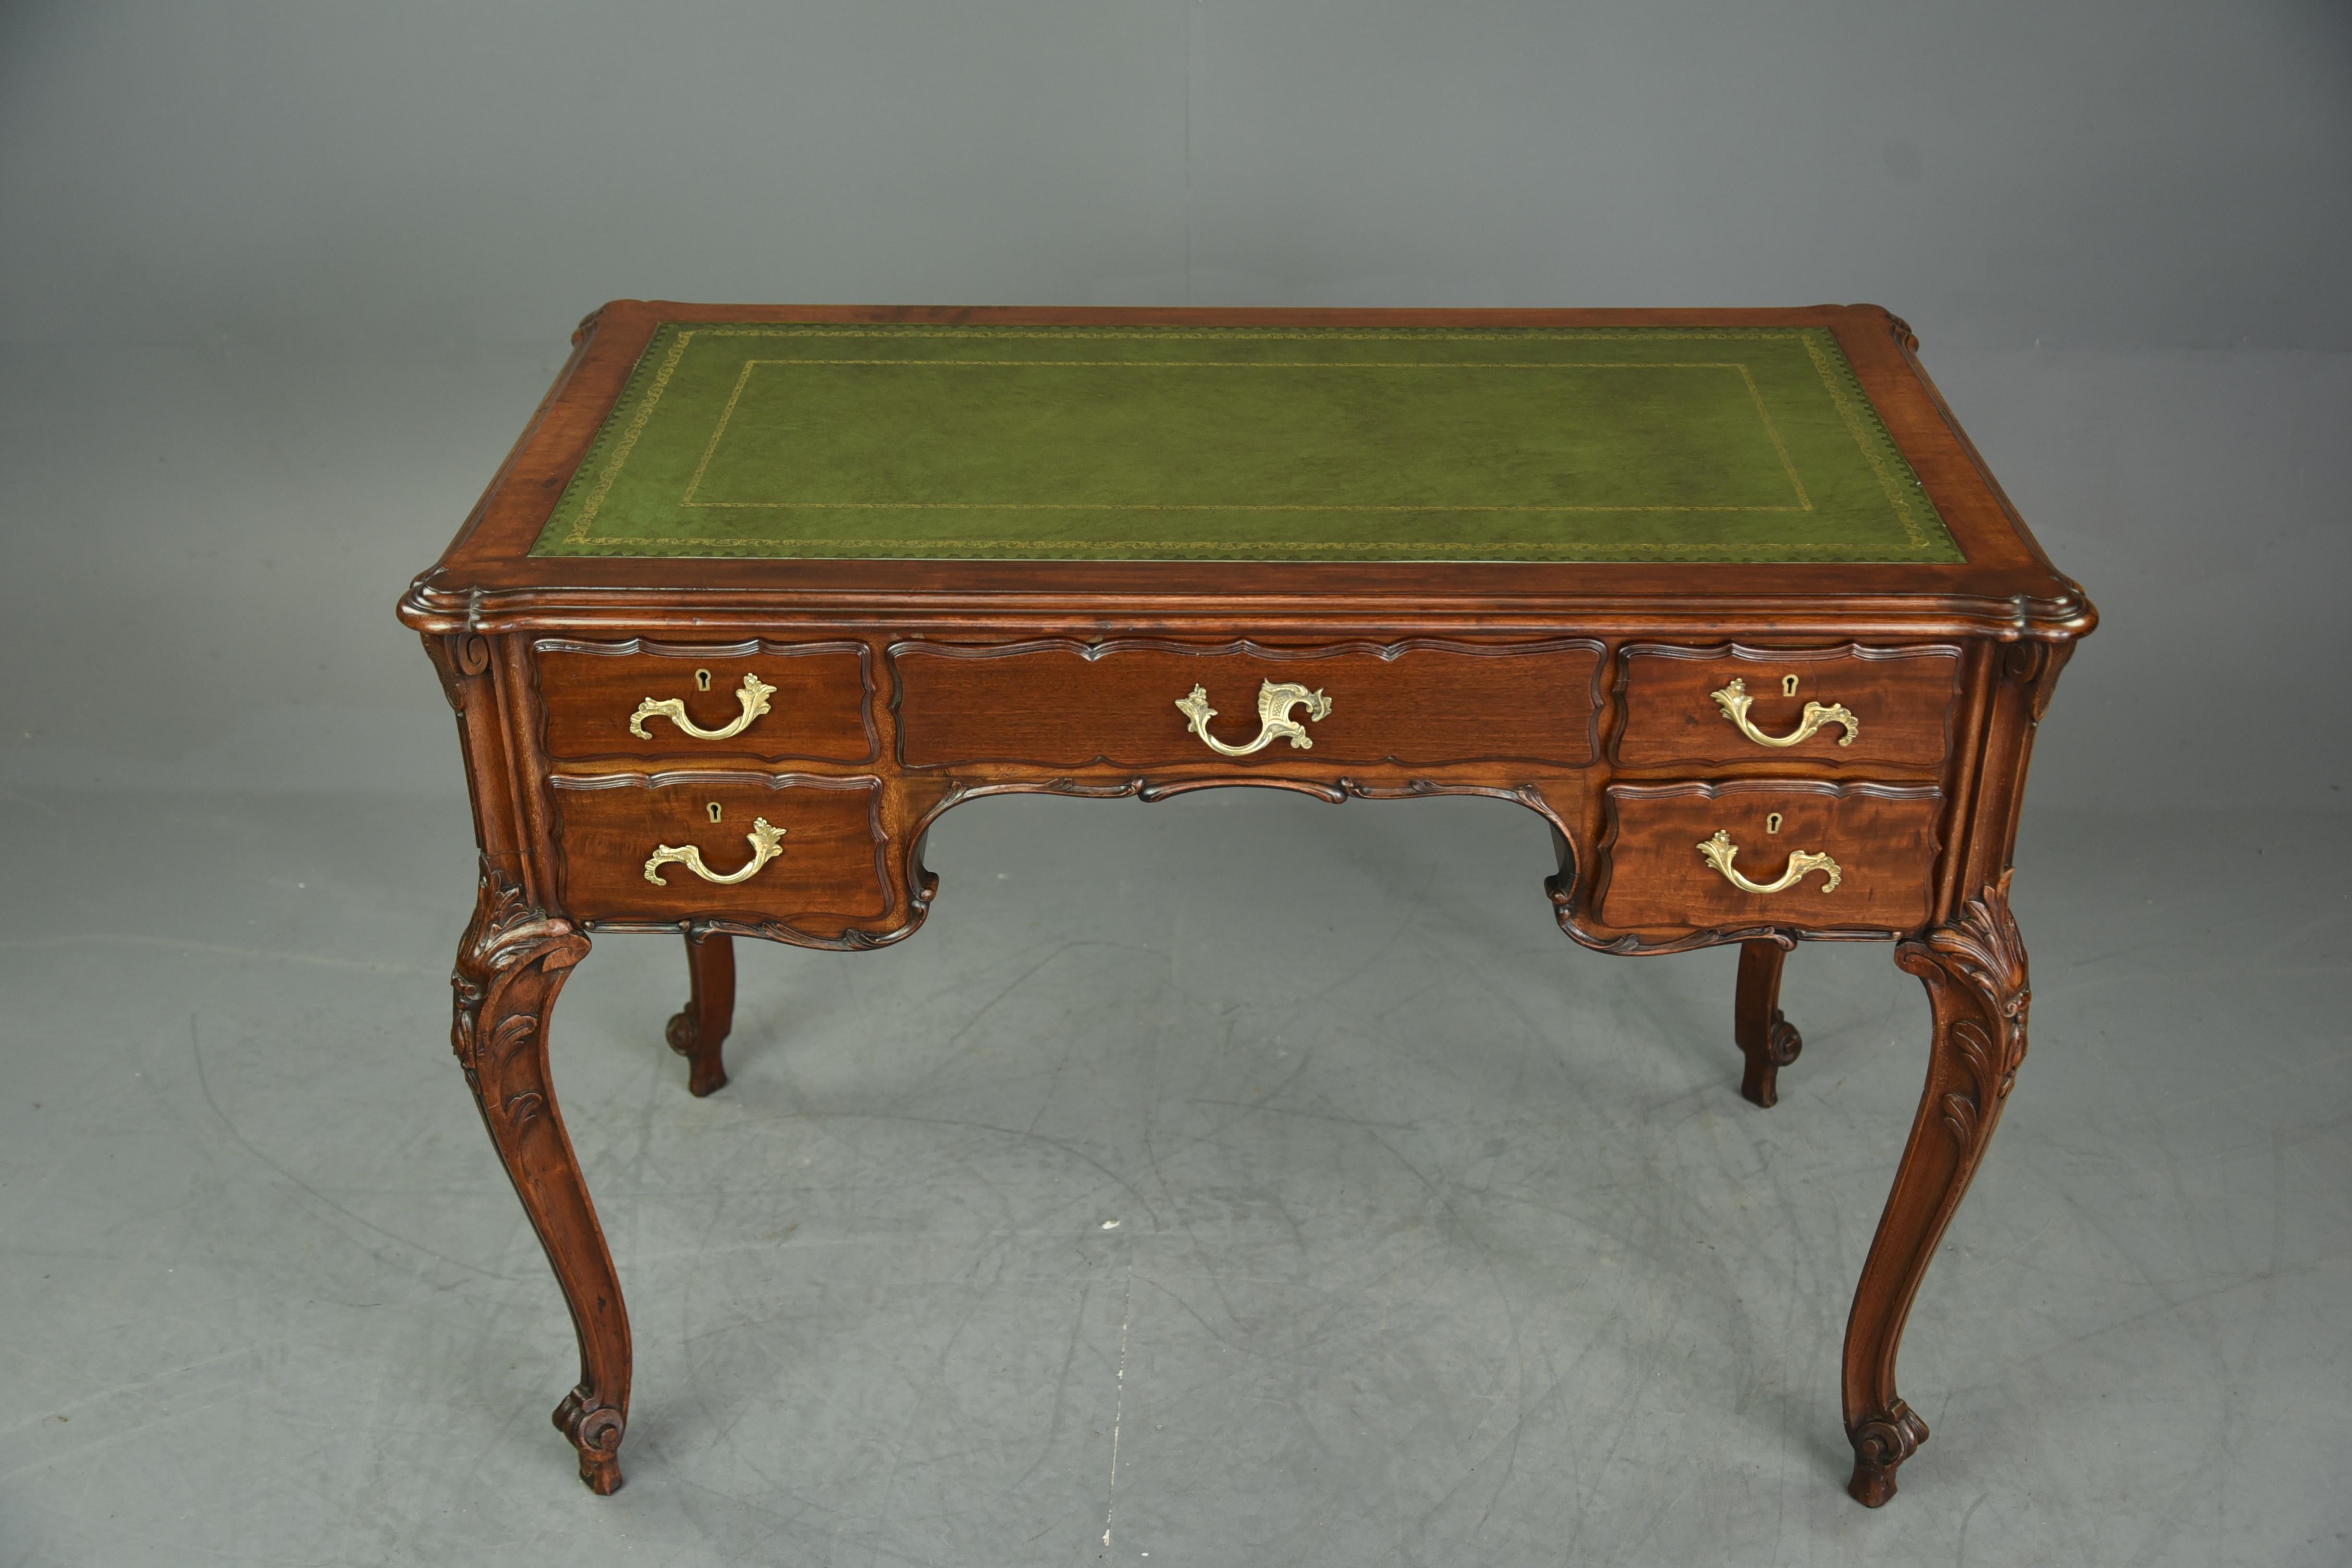 Fine quality late 19th century French Rococo red walnut Writing table / Desk 
The desk has quality carved cabriole legs with ornate brass ormolu handles.
All drawers slide nice and smooth as they should with original locks (no keys ) 
The desk